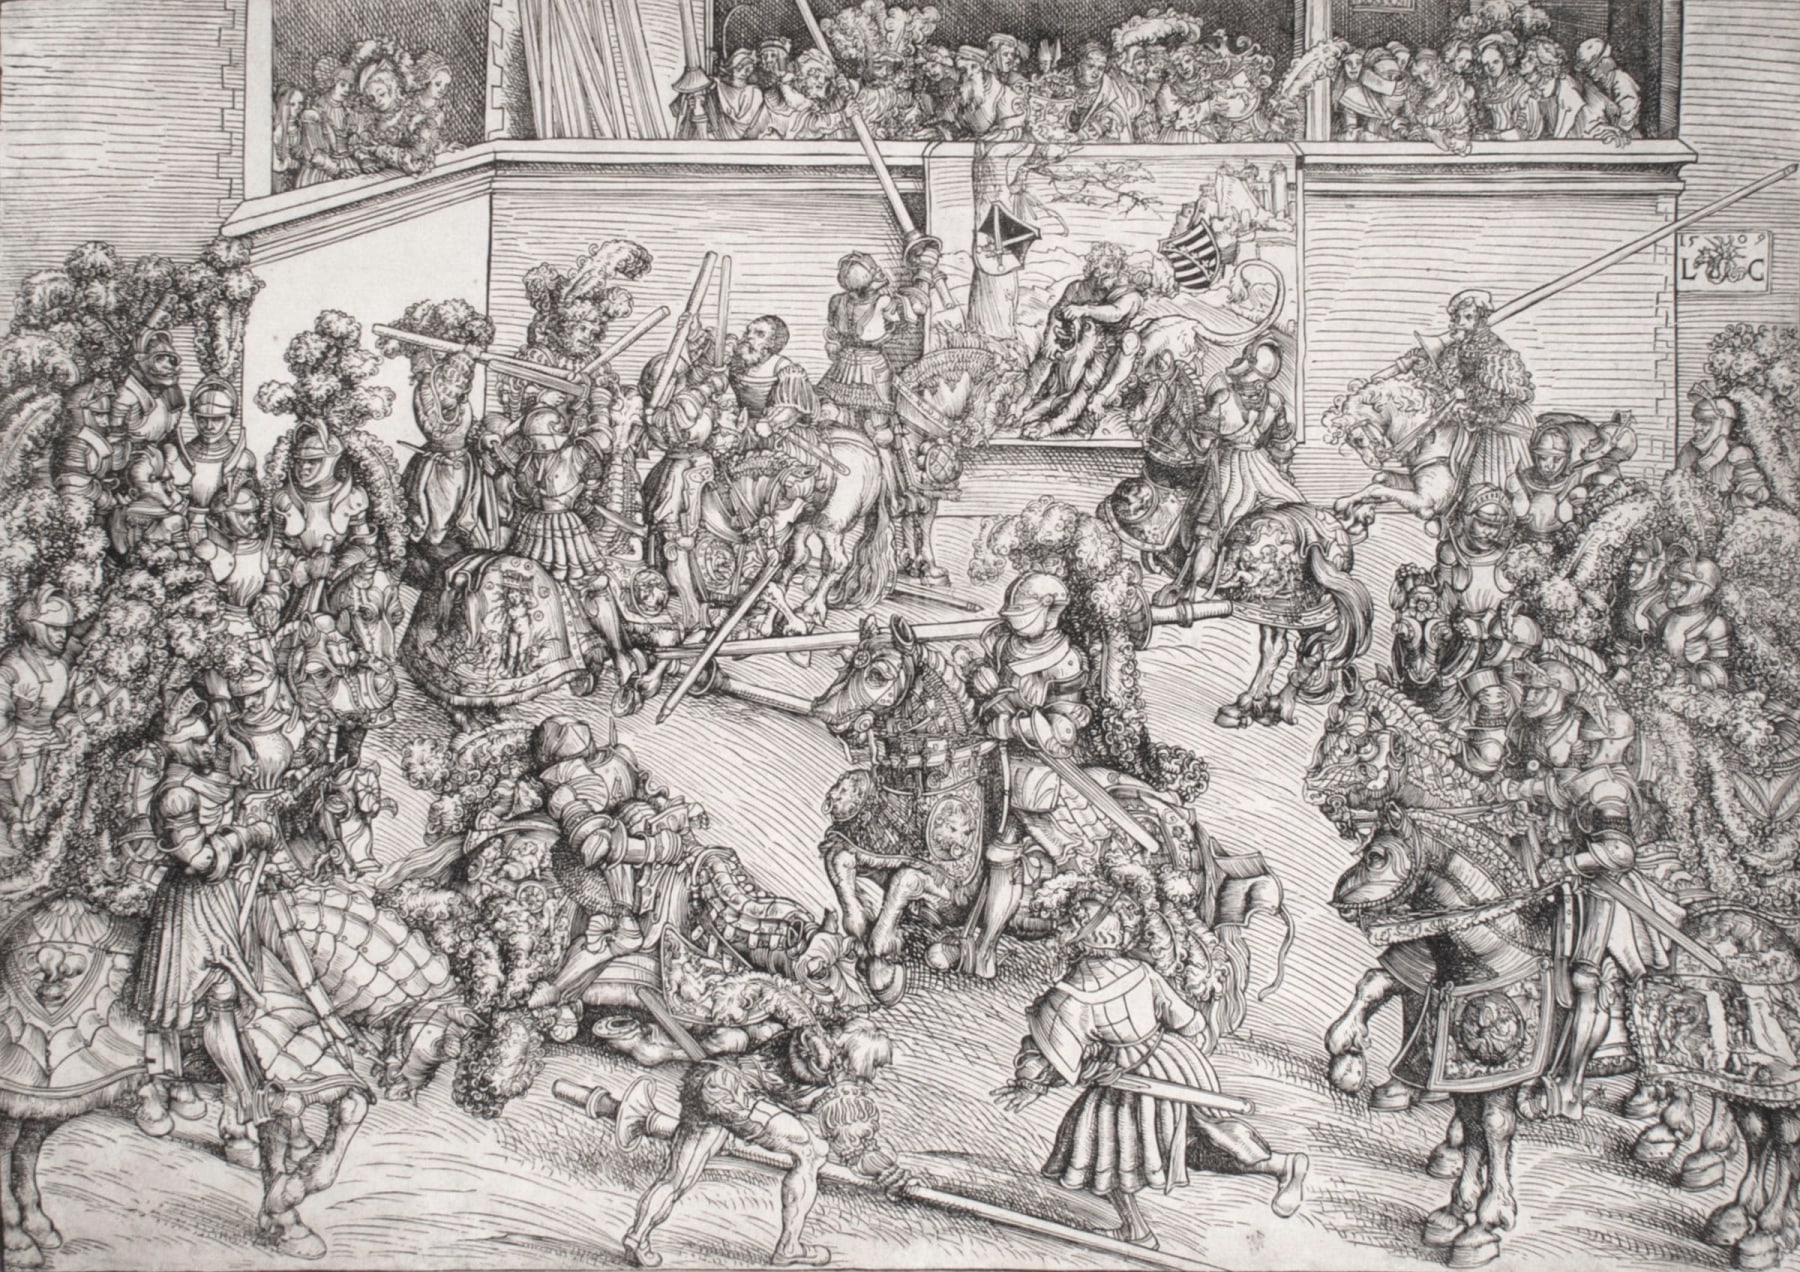 Lucas Cranach - The Second Tournament with the Tapestry of Samson and the Lion